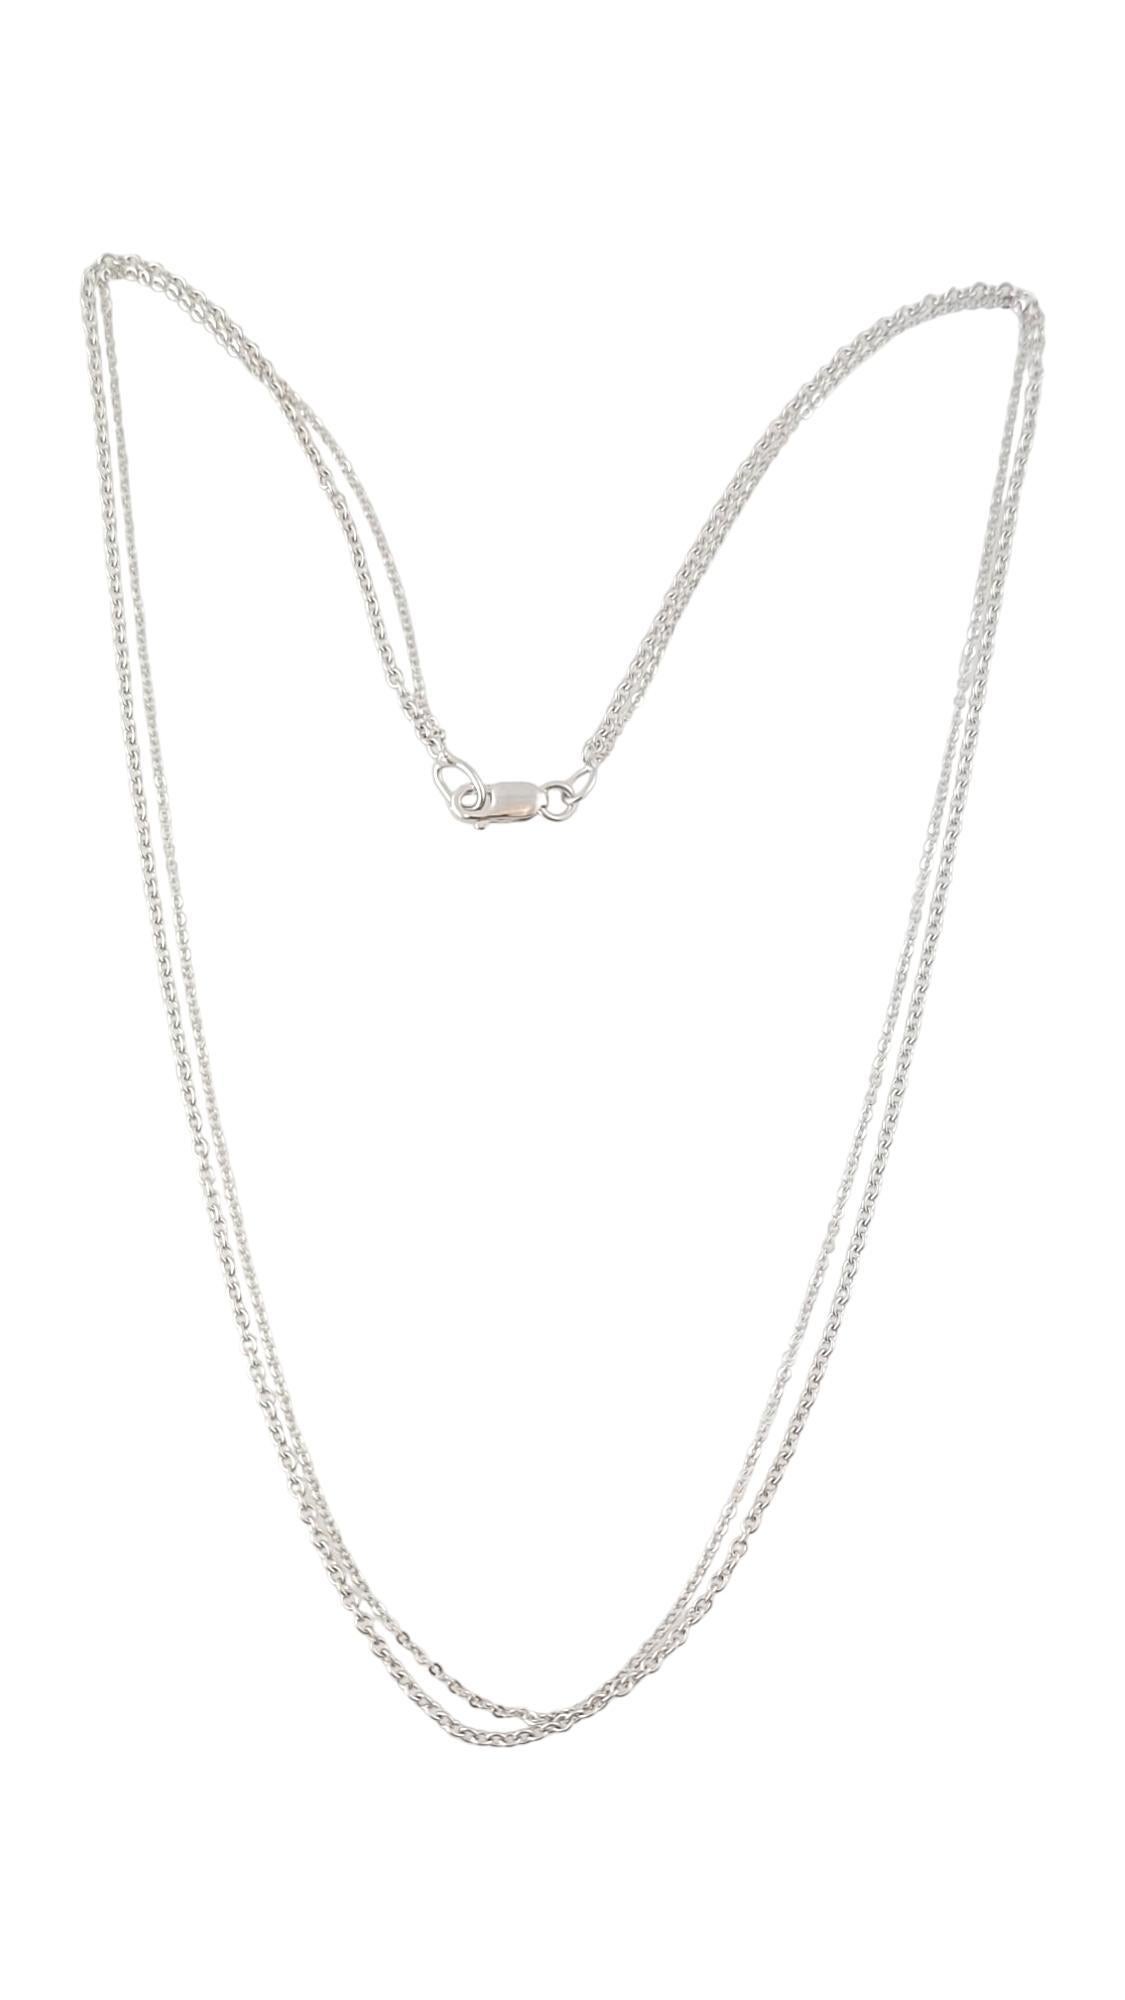 14K White Gold Two-Strand Chain Necklace #16318 In Good Condition For Sale In Washington Depot, CT